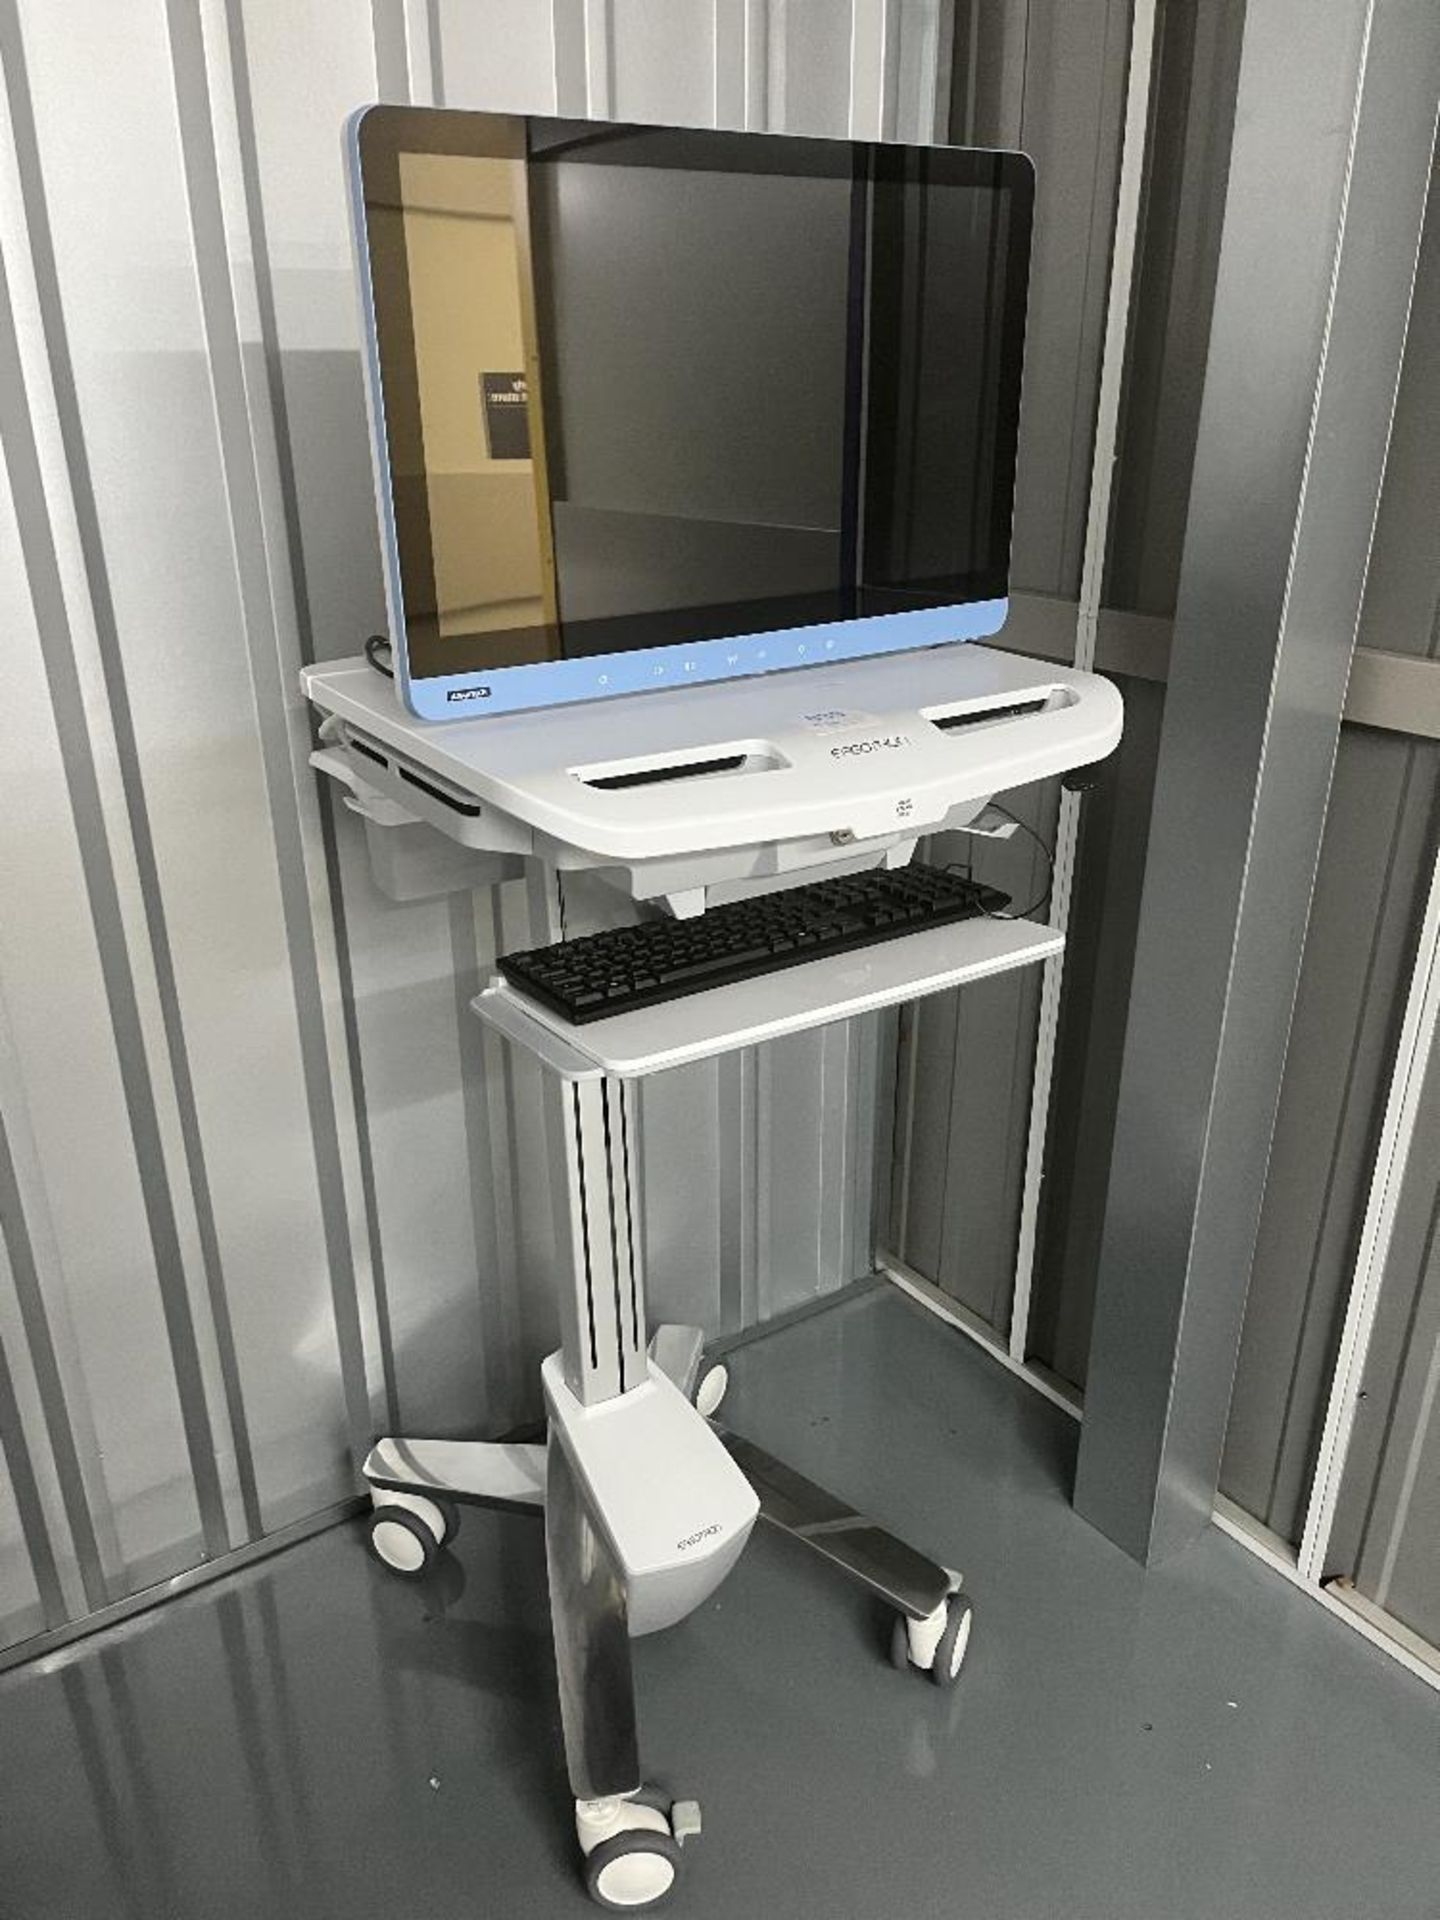 Ergotron Styleview Cart Type SV41-6200-0 Full Featured Medical Cart with Advantech POC-624-01 AIO PC - Image 3 of 9